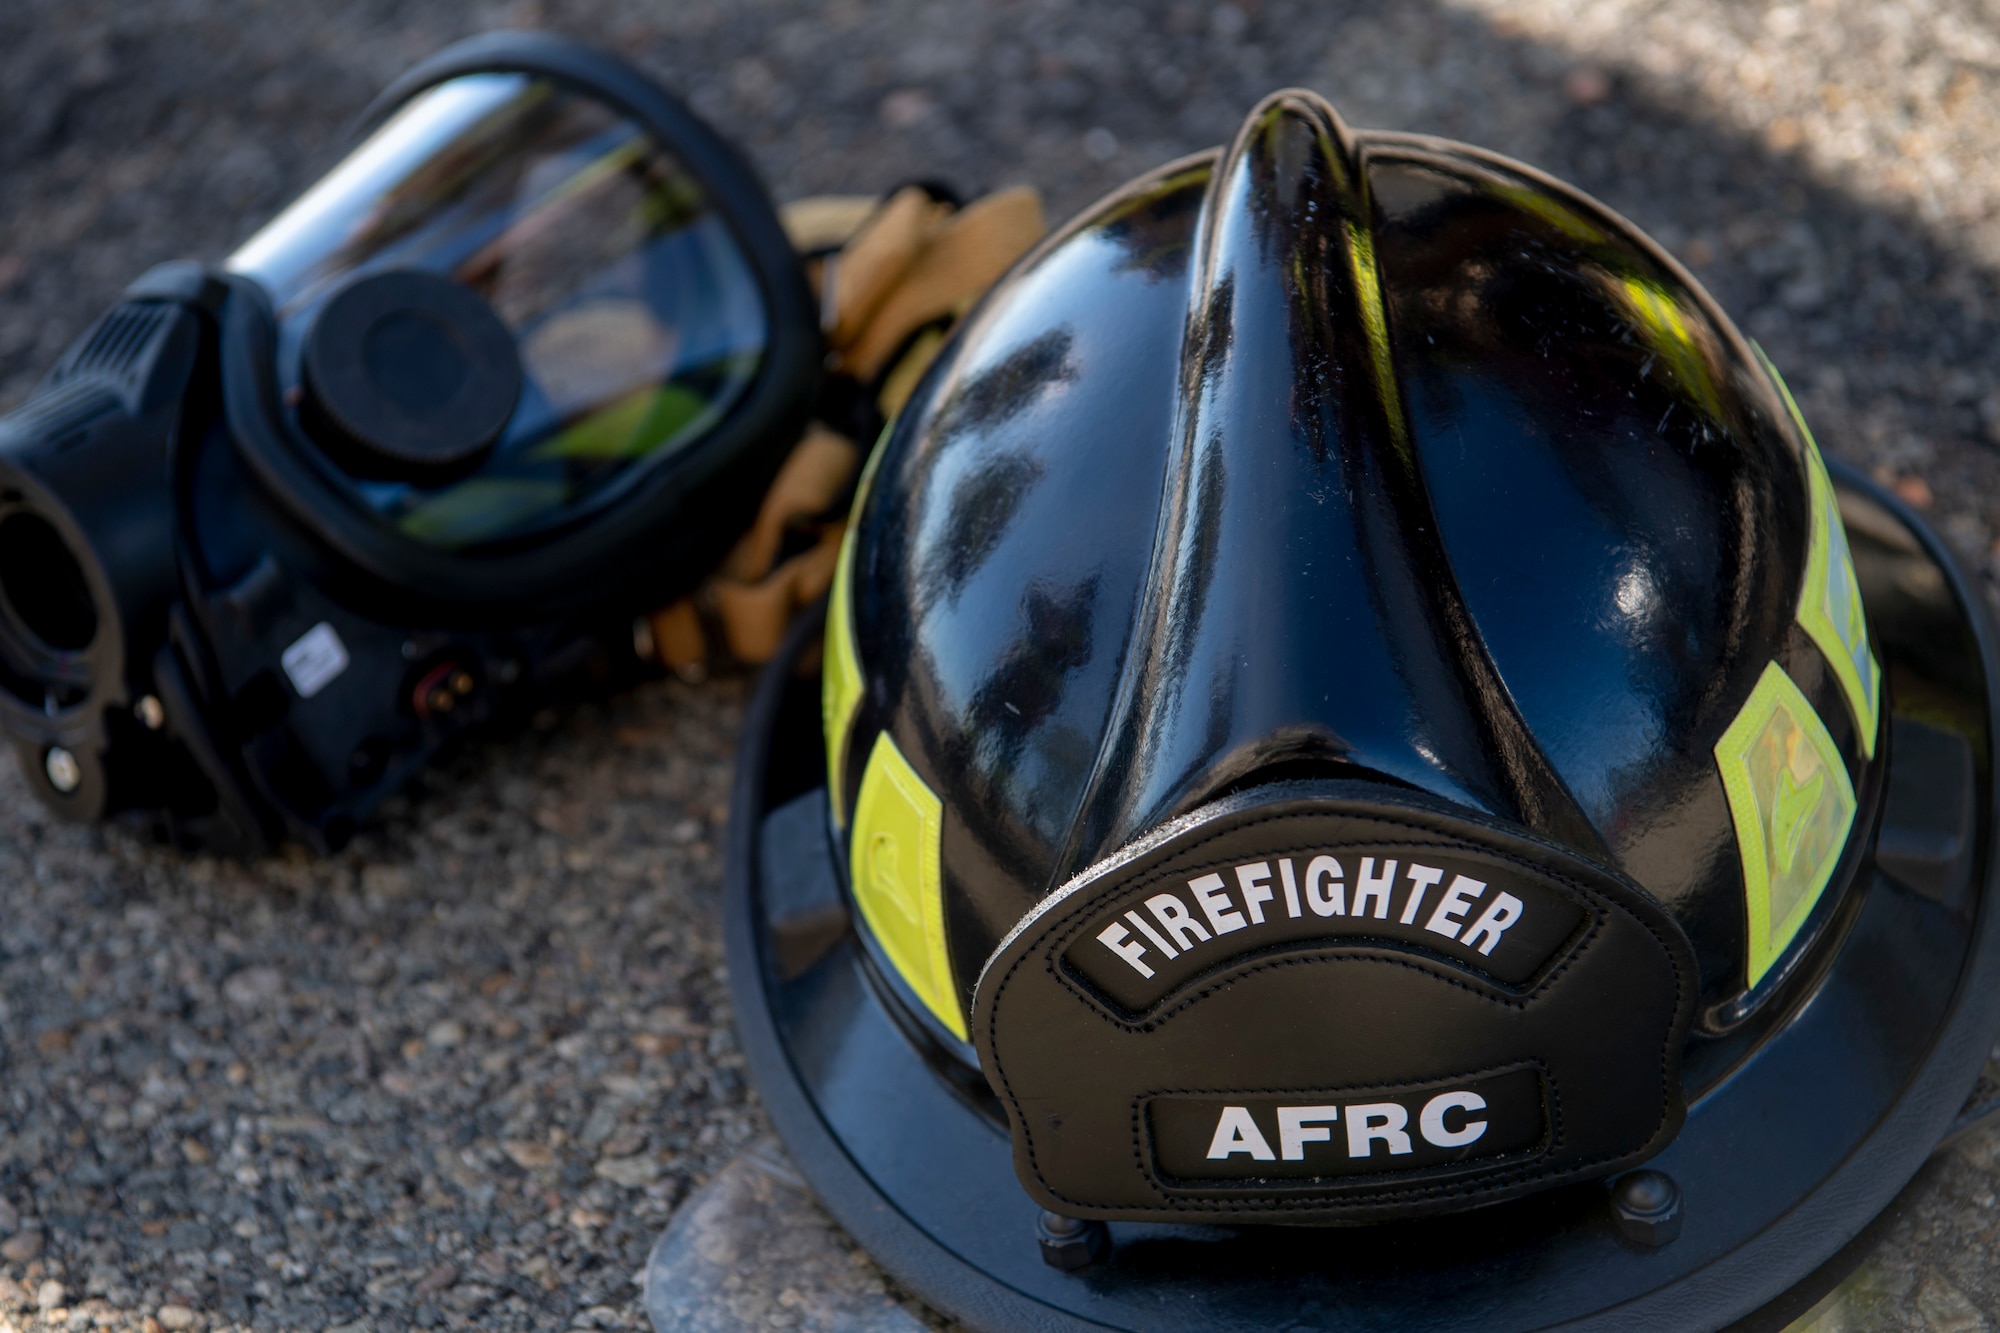 M7 FireHawk masks and fire helmets are part of the personal protective equipment firefighters must wear to reduce their chances for injury or death. (U.S. Air Force photo by Staff Sgt. Mary McKnight)